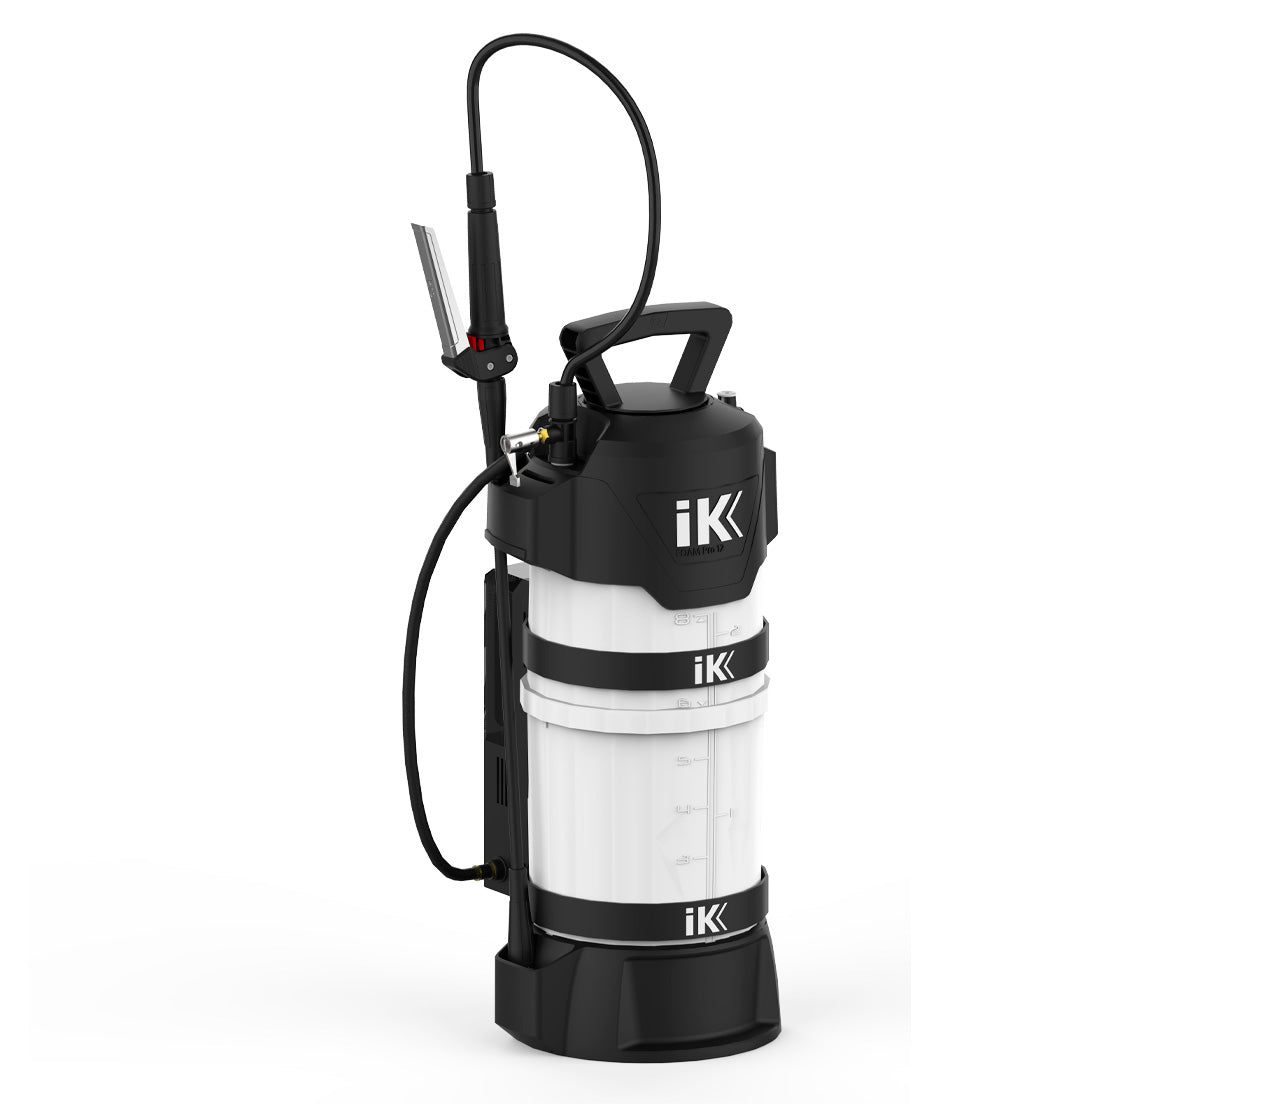 Can confirm the iK Foam PRO 2 Pump Sprayer is worth getting to